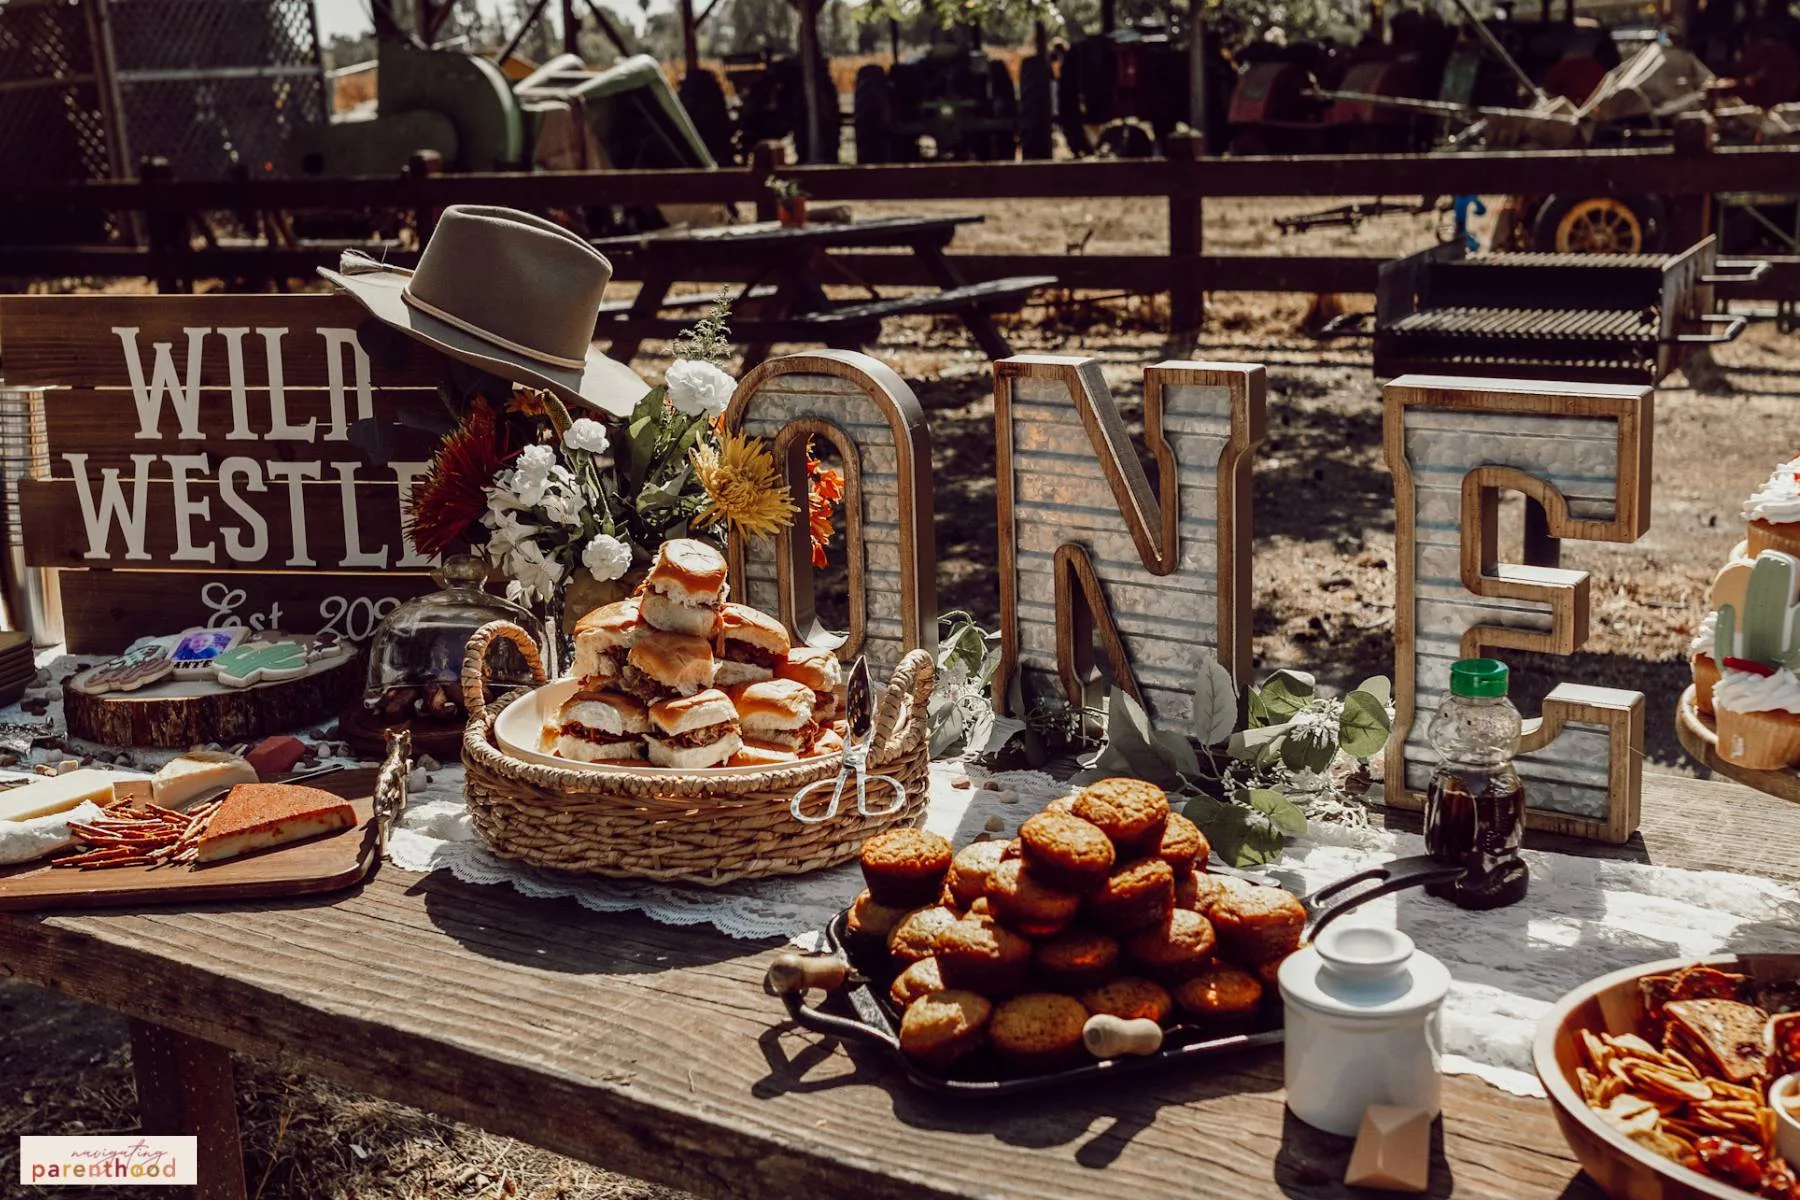 Wild West birthday party table